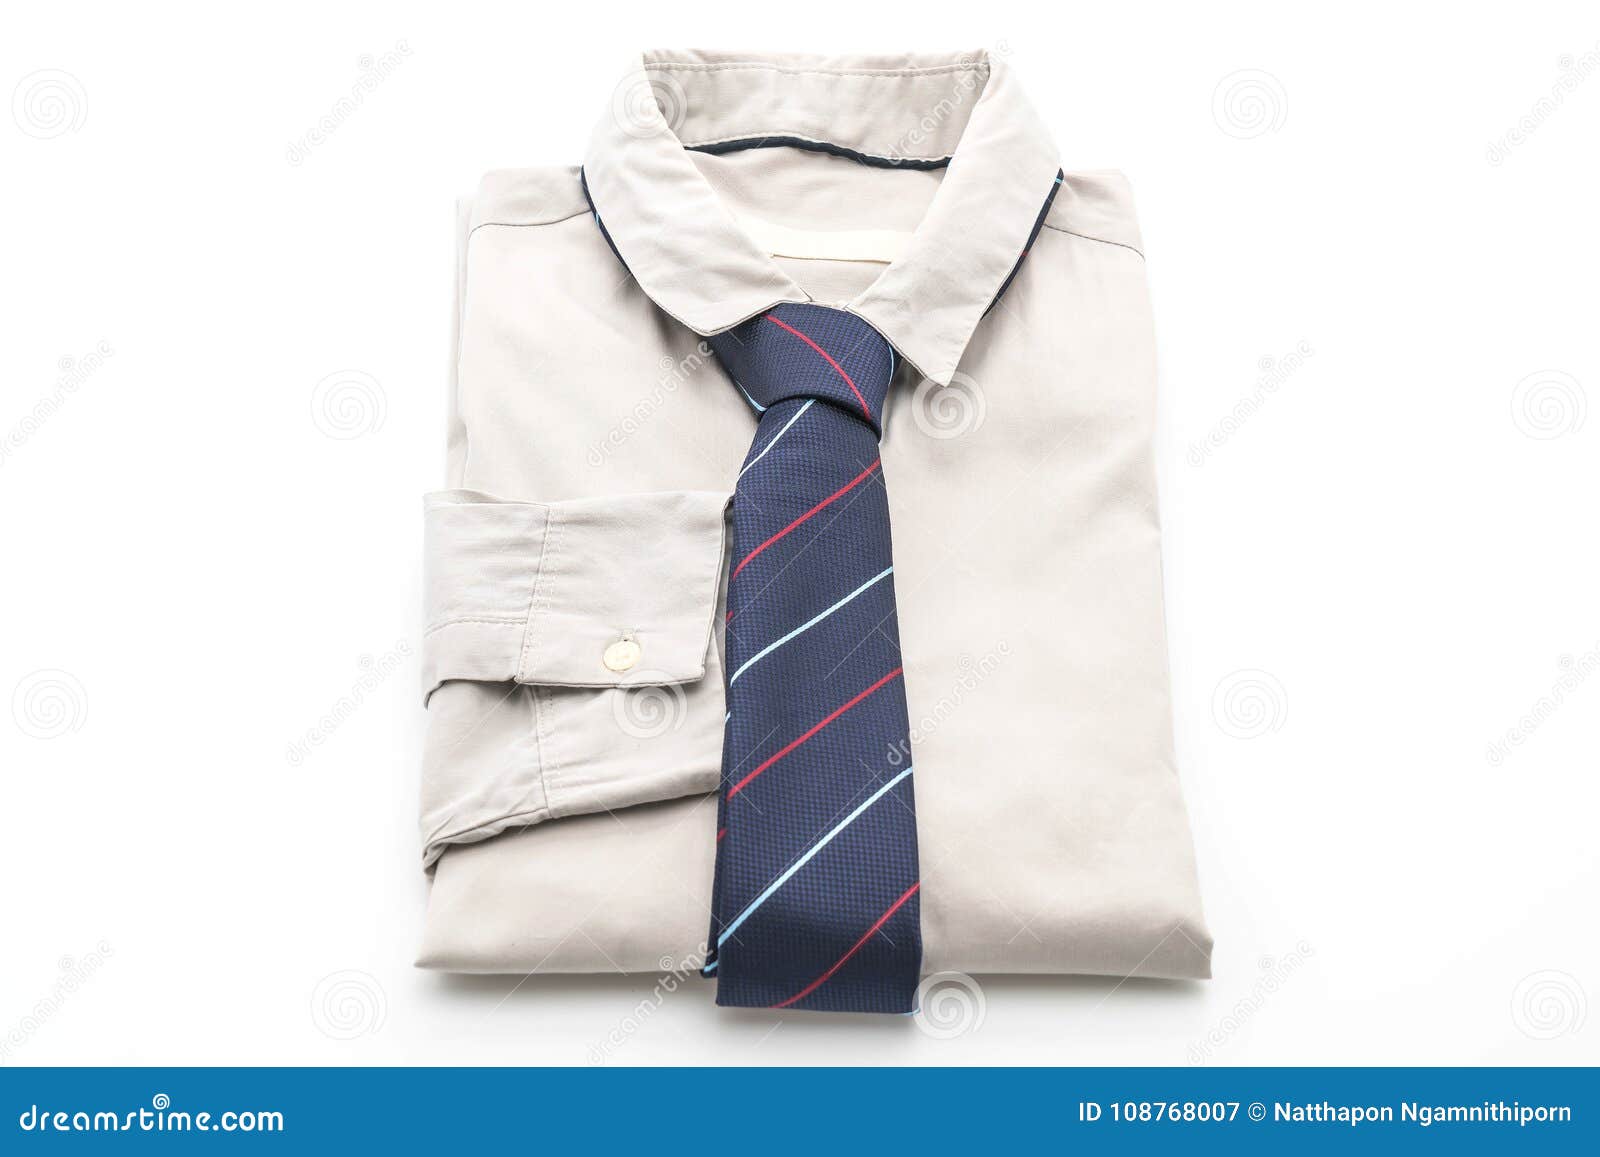 Shirt with necktie stock image. Image of professional - 108768007